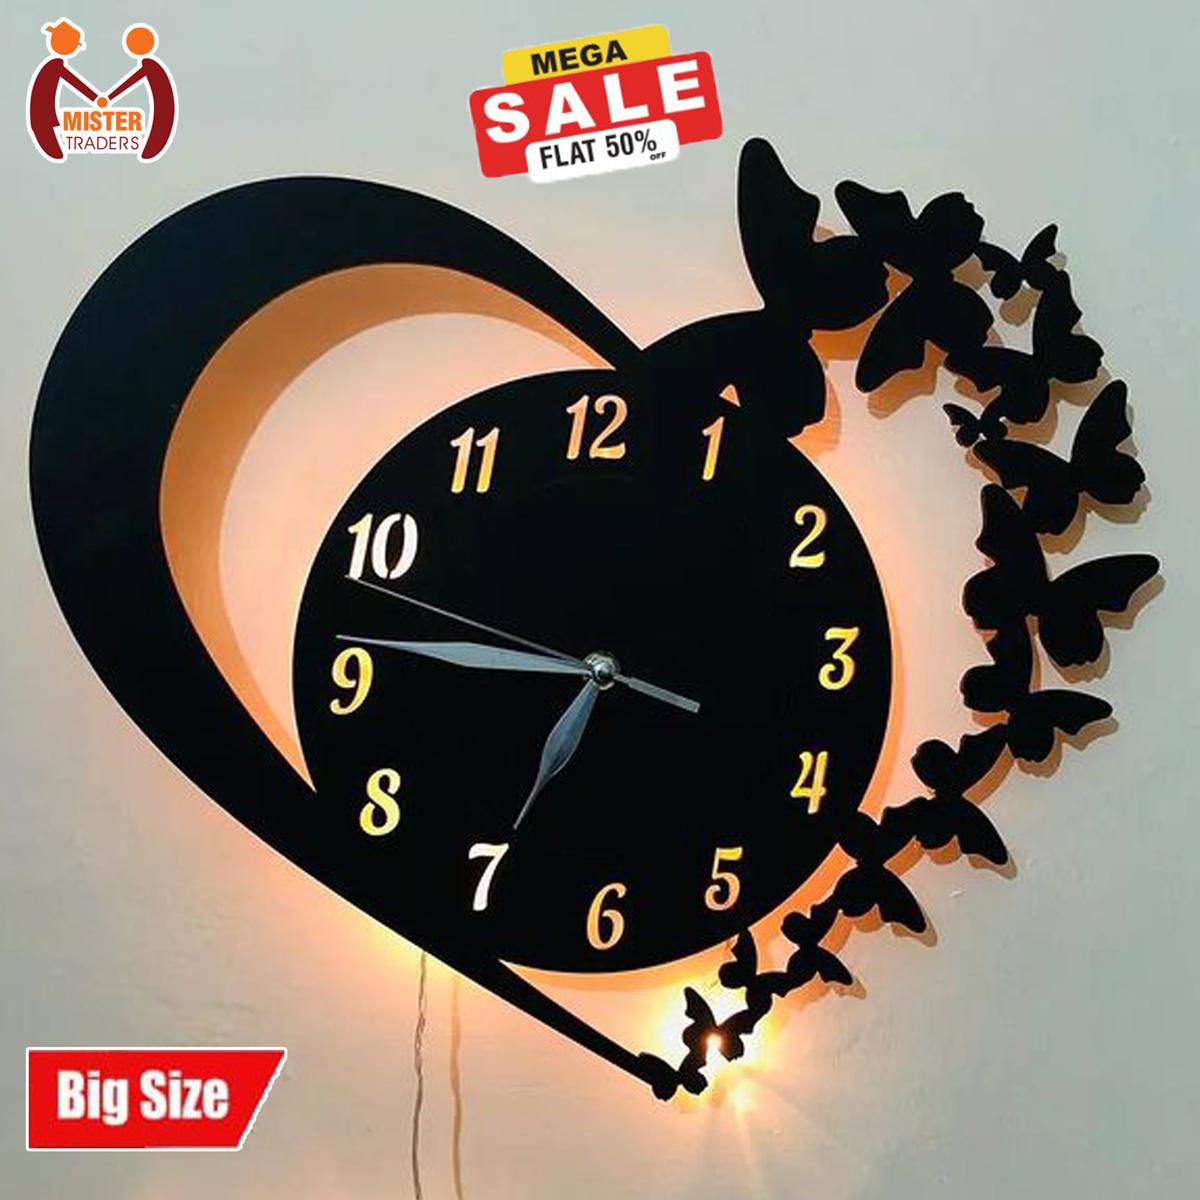 Lifestyle Glory Heart Wooden Clock With Premium Light I The New Wooden Wall Clock Big Size I Wall Clock I Wooden Wall Clock I Wall clocks for bedroom I Wall Clocks for drawing room I Wooden Wall Clocks for bedroom